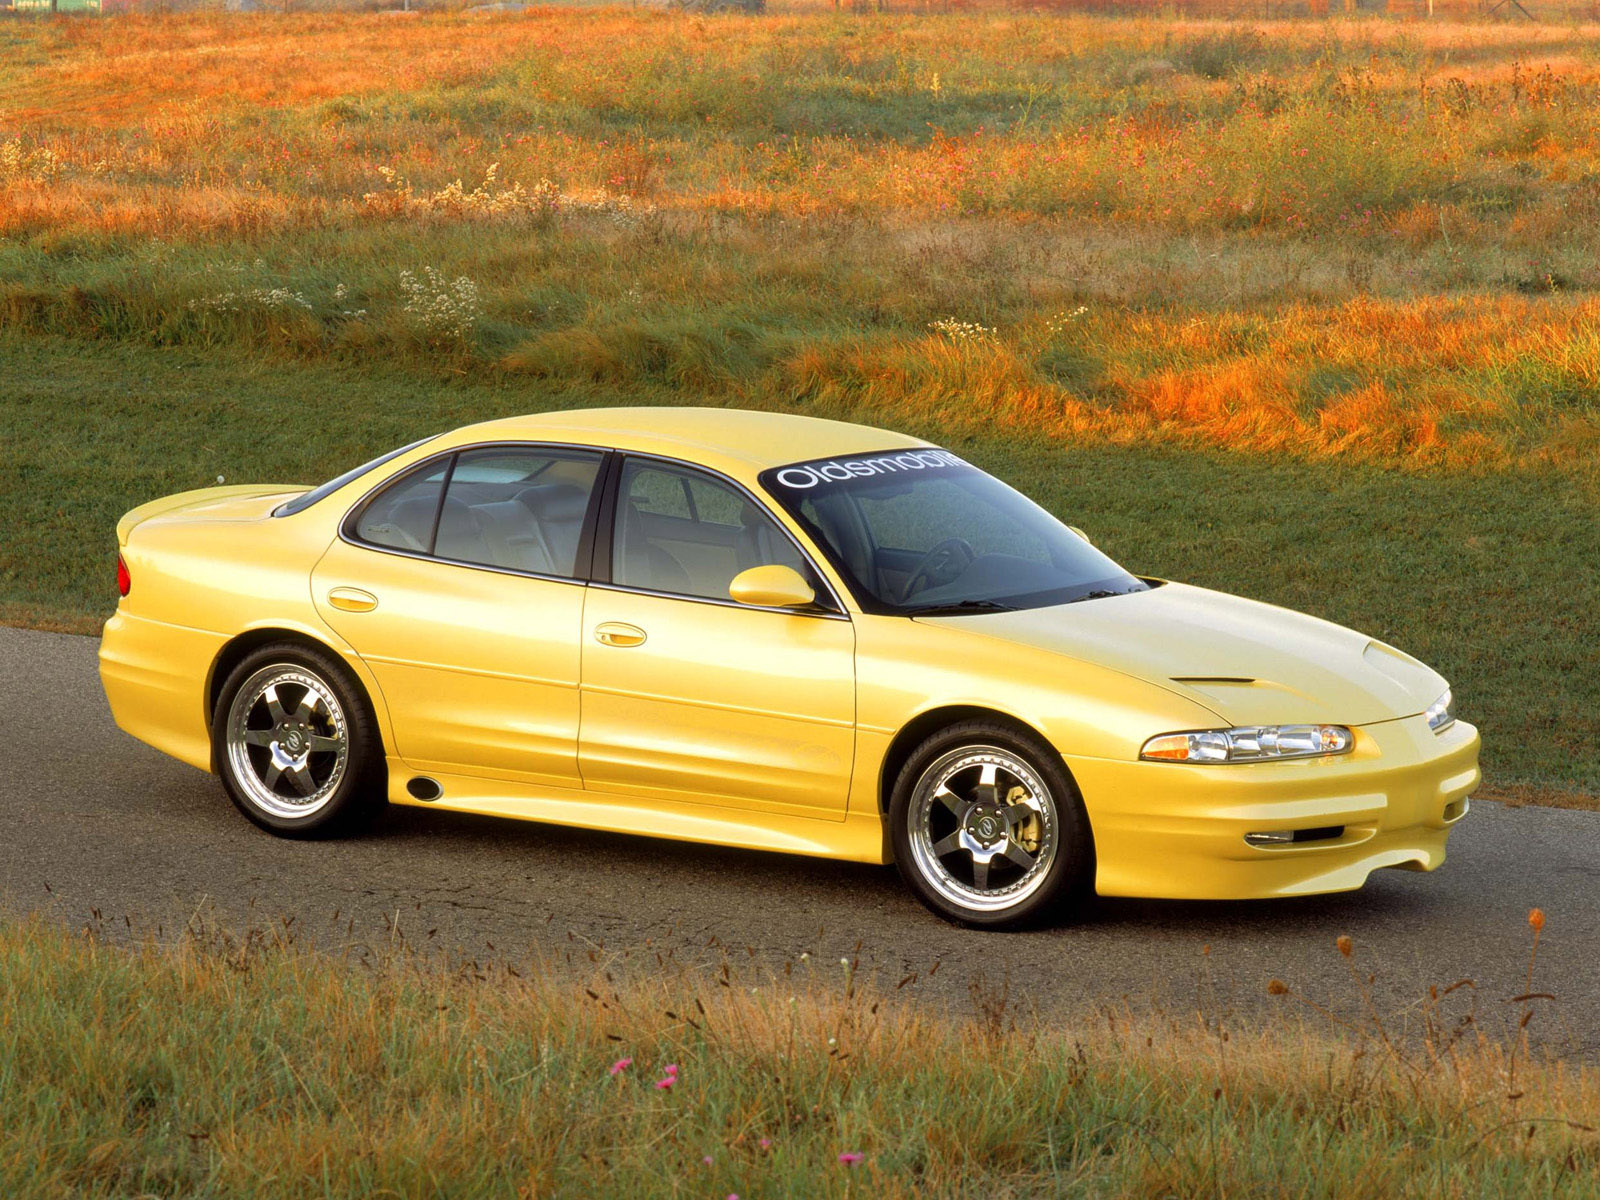 2000 Oldsmobile Intrigue tuning wallpaper | 1600x1200 | 107164 | WallpaperUP